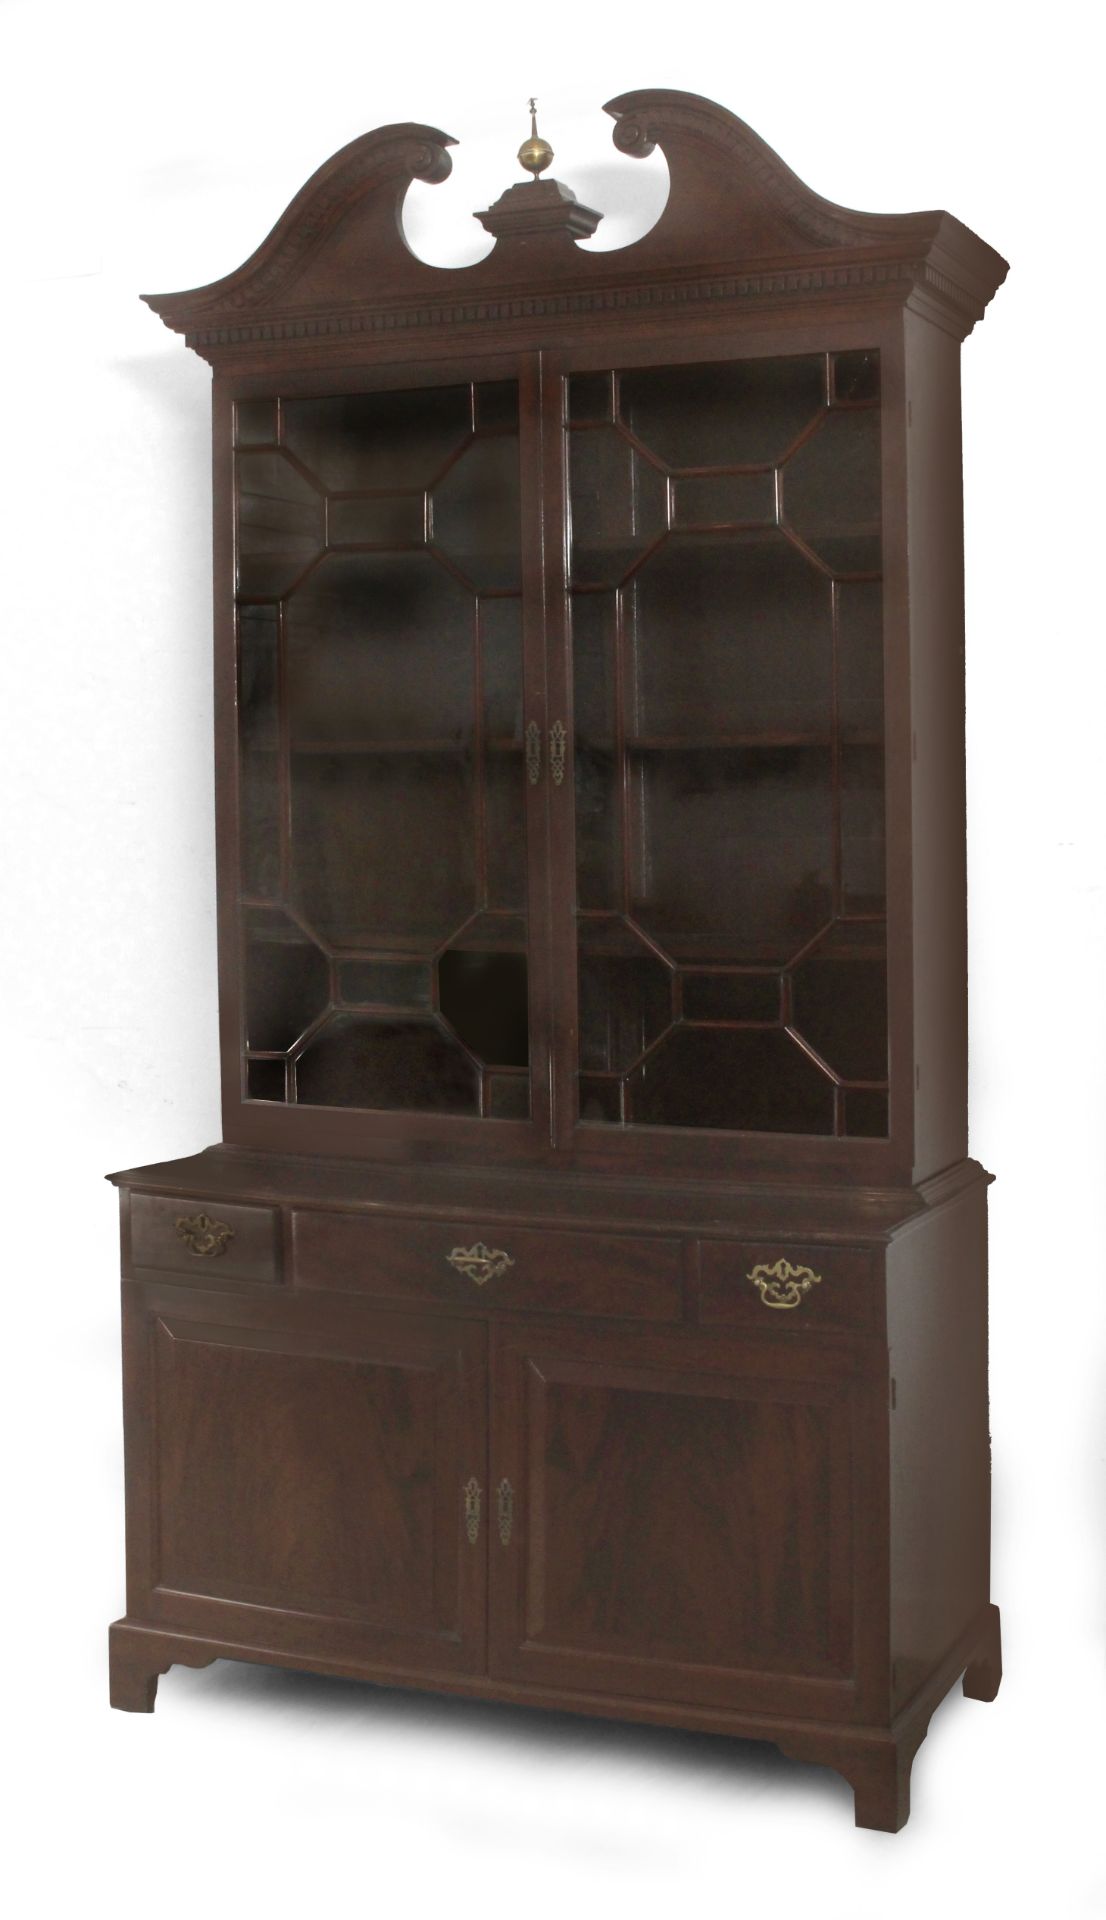 An early 19th century English mahogany writing bookcase desk from George IV period